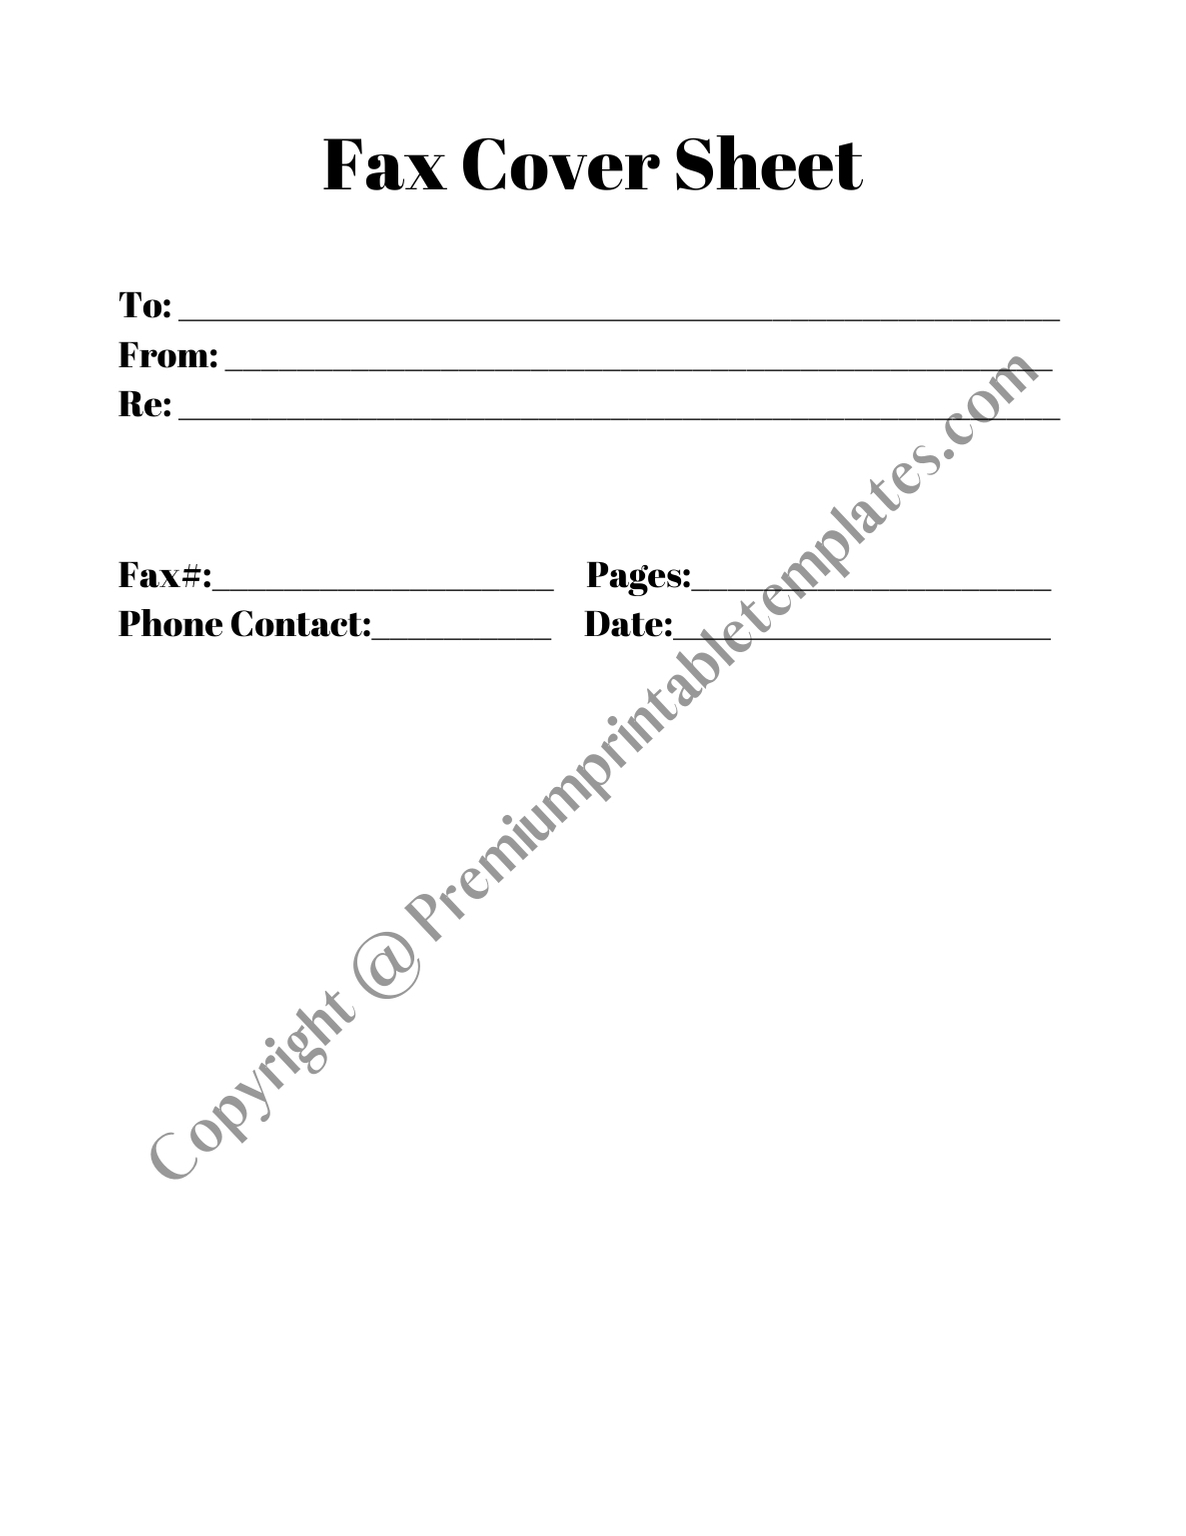 personal fax cover sheet printable template download editable pdf